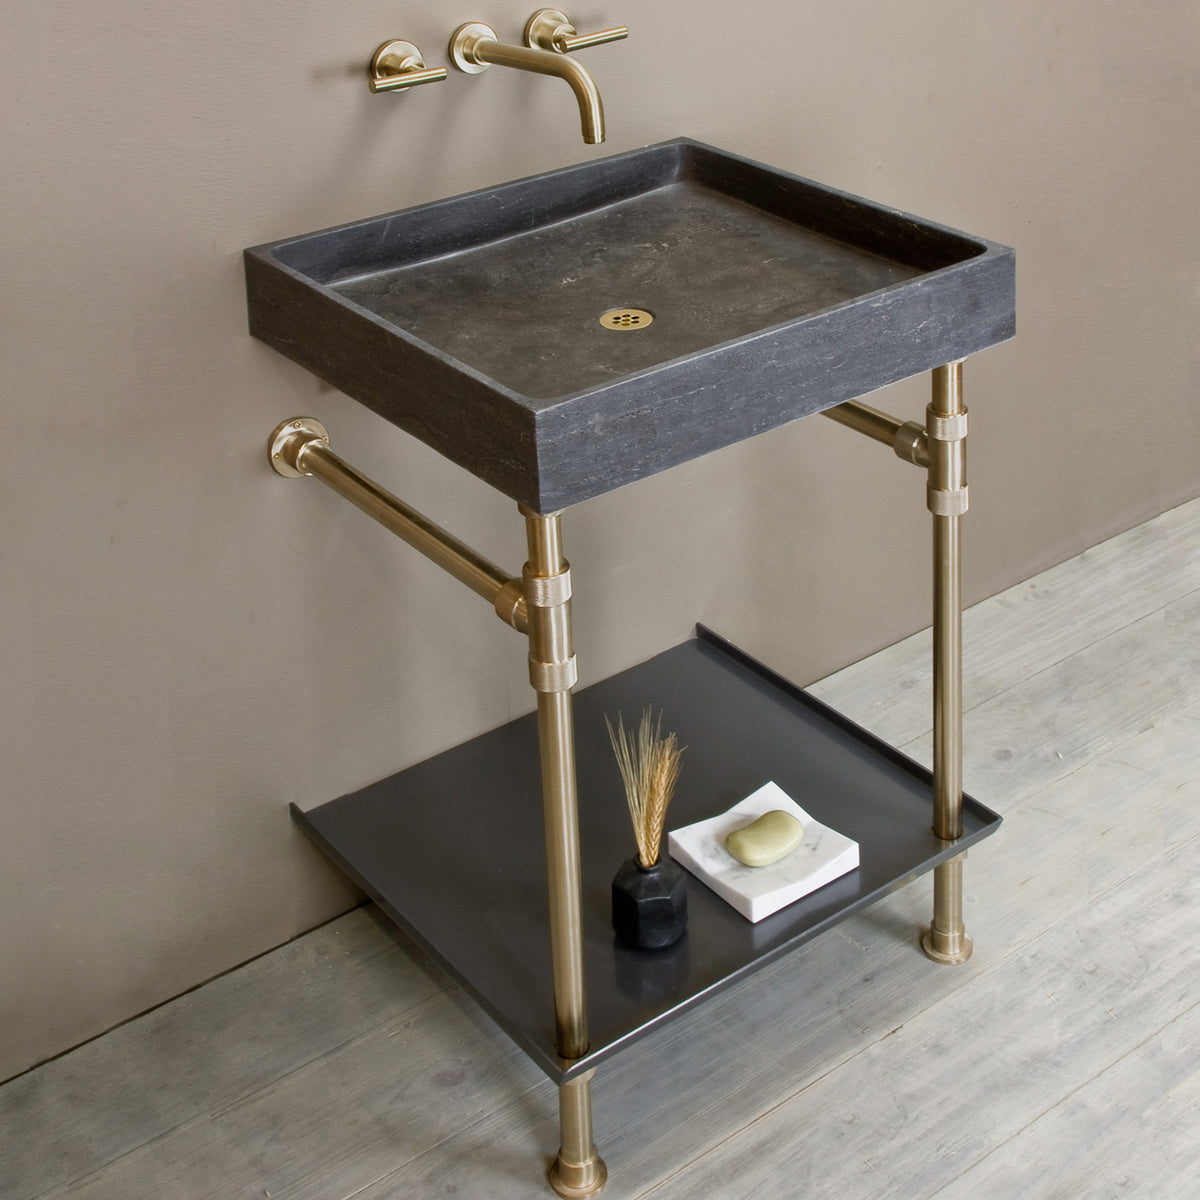 Ventus Bath Sink with Folded Metal Tray, Stone Forest